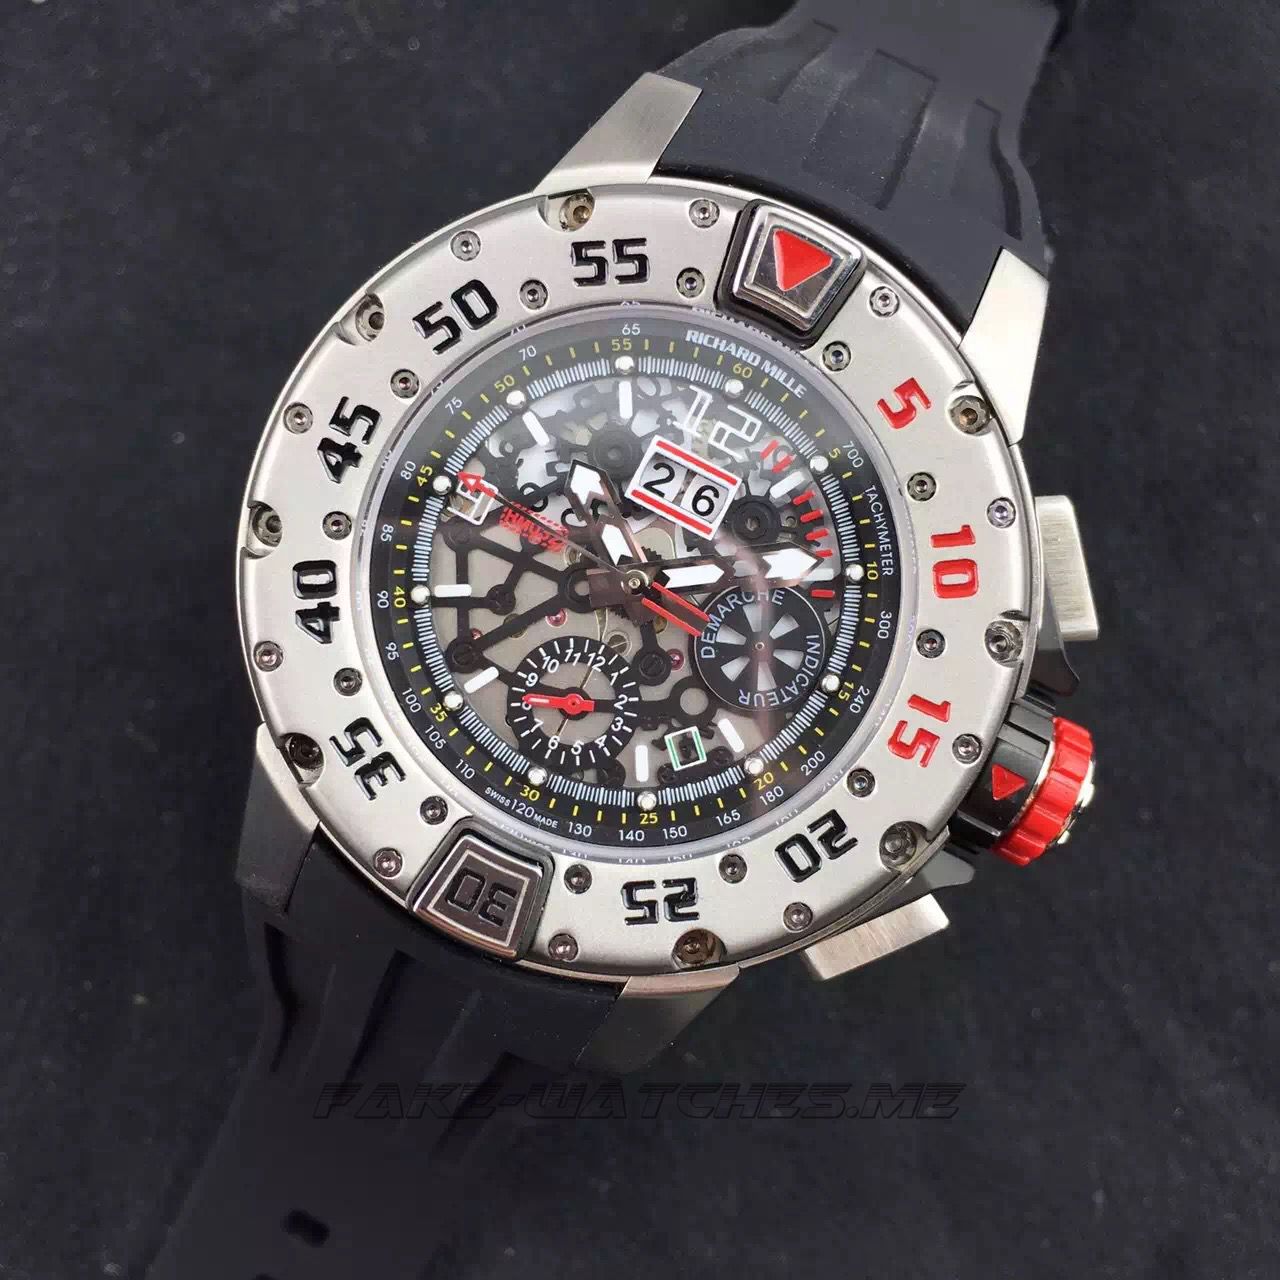 Richard Mille RM032 Stainless Steel Black Dial